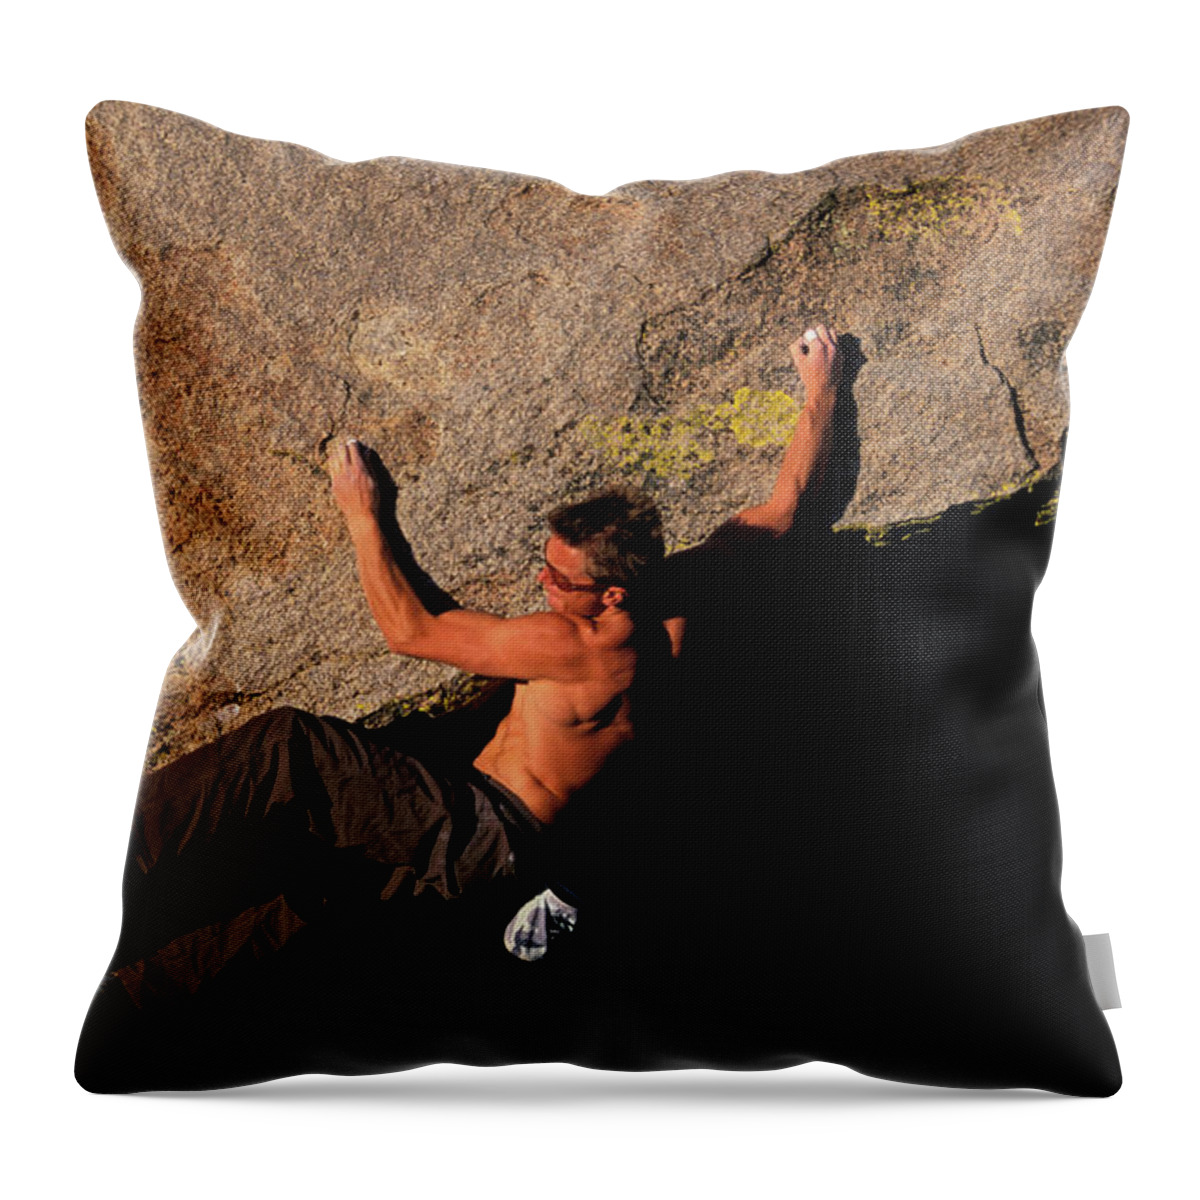 Action Throw Pillow featuring the photograph A Male Rock Climber Bouldering On An by Corey Rich